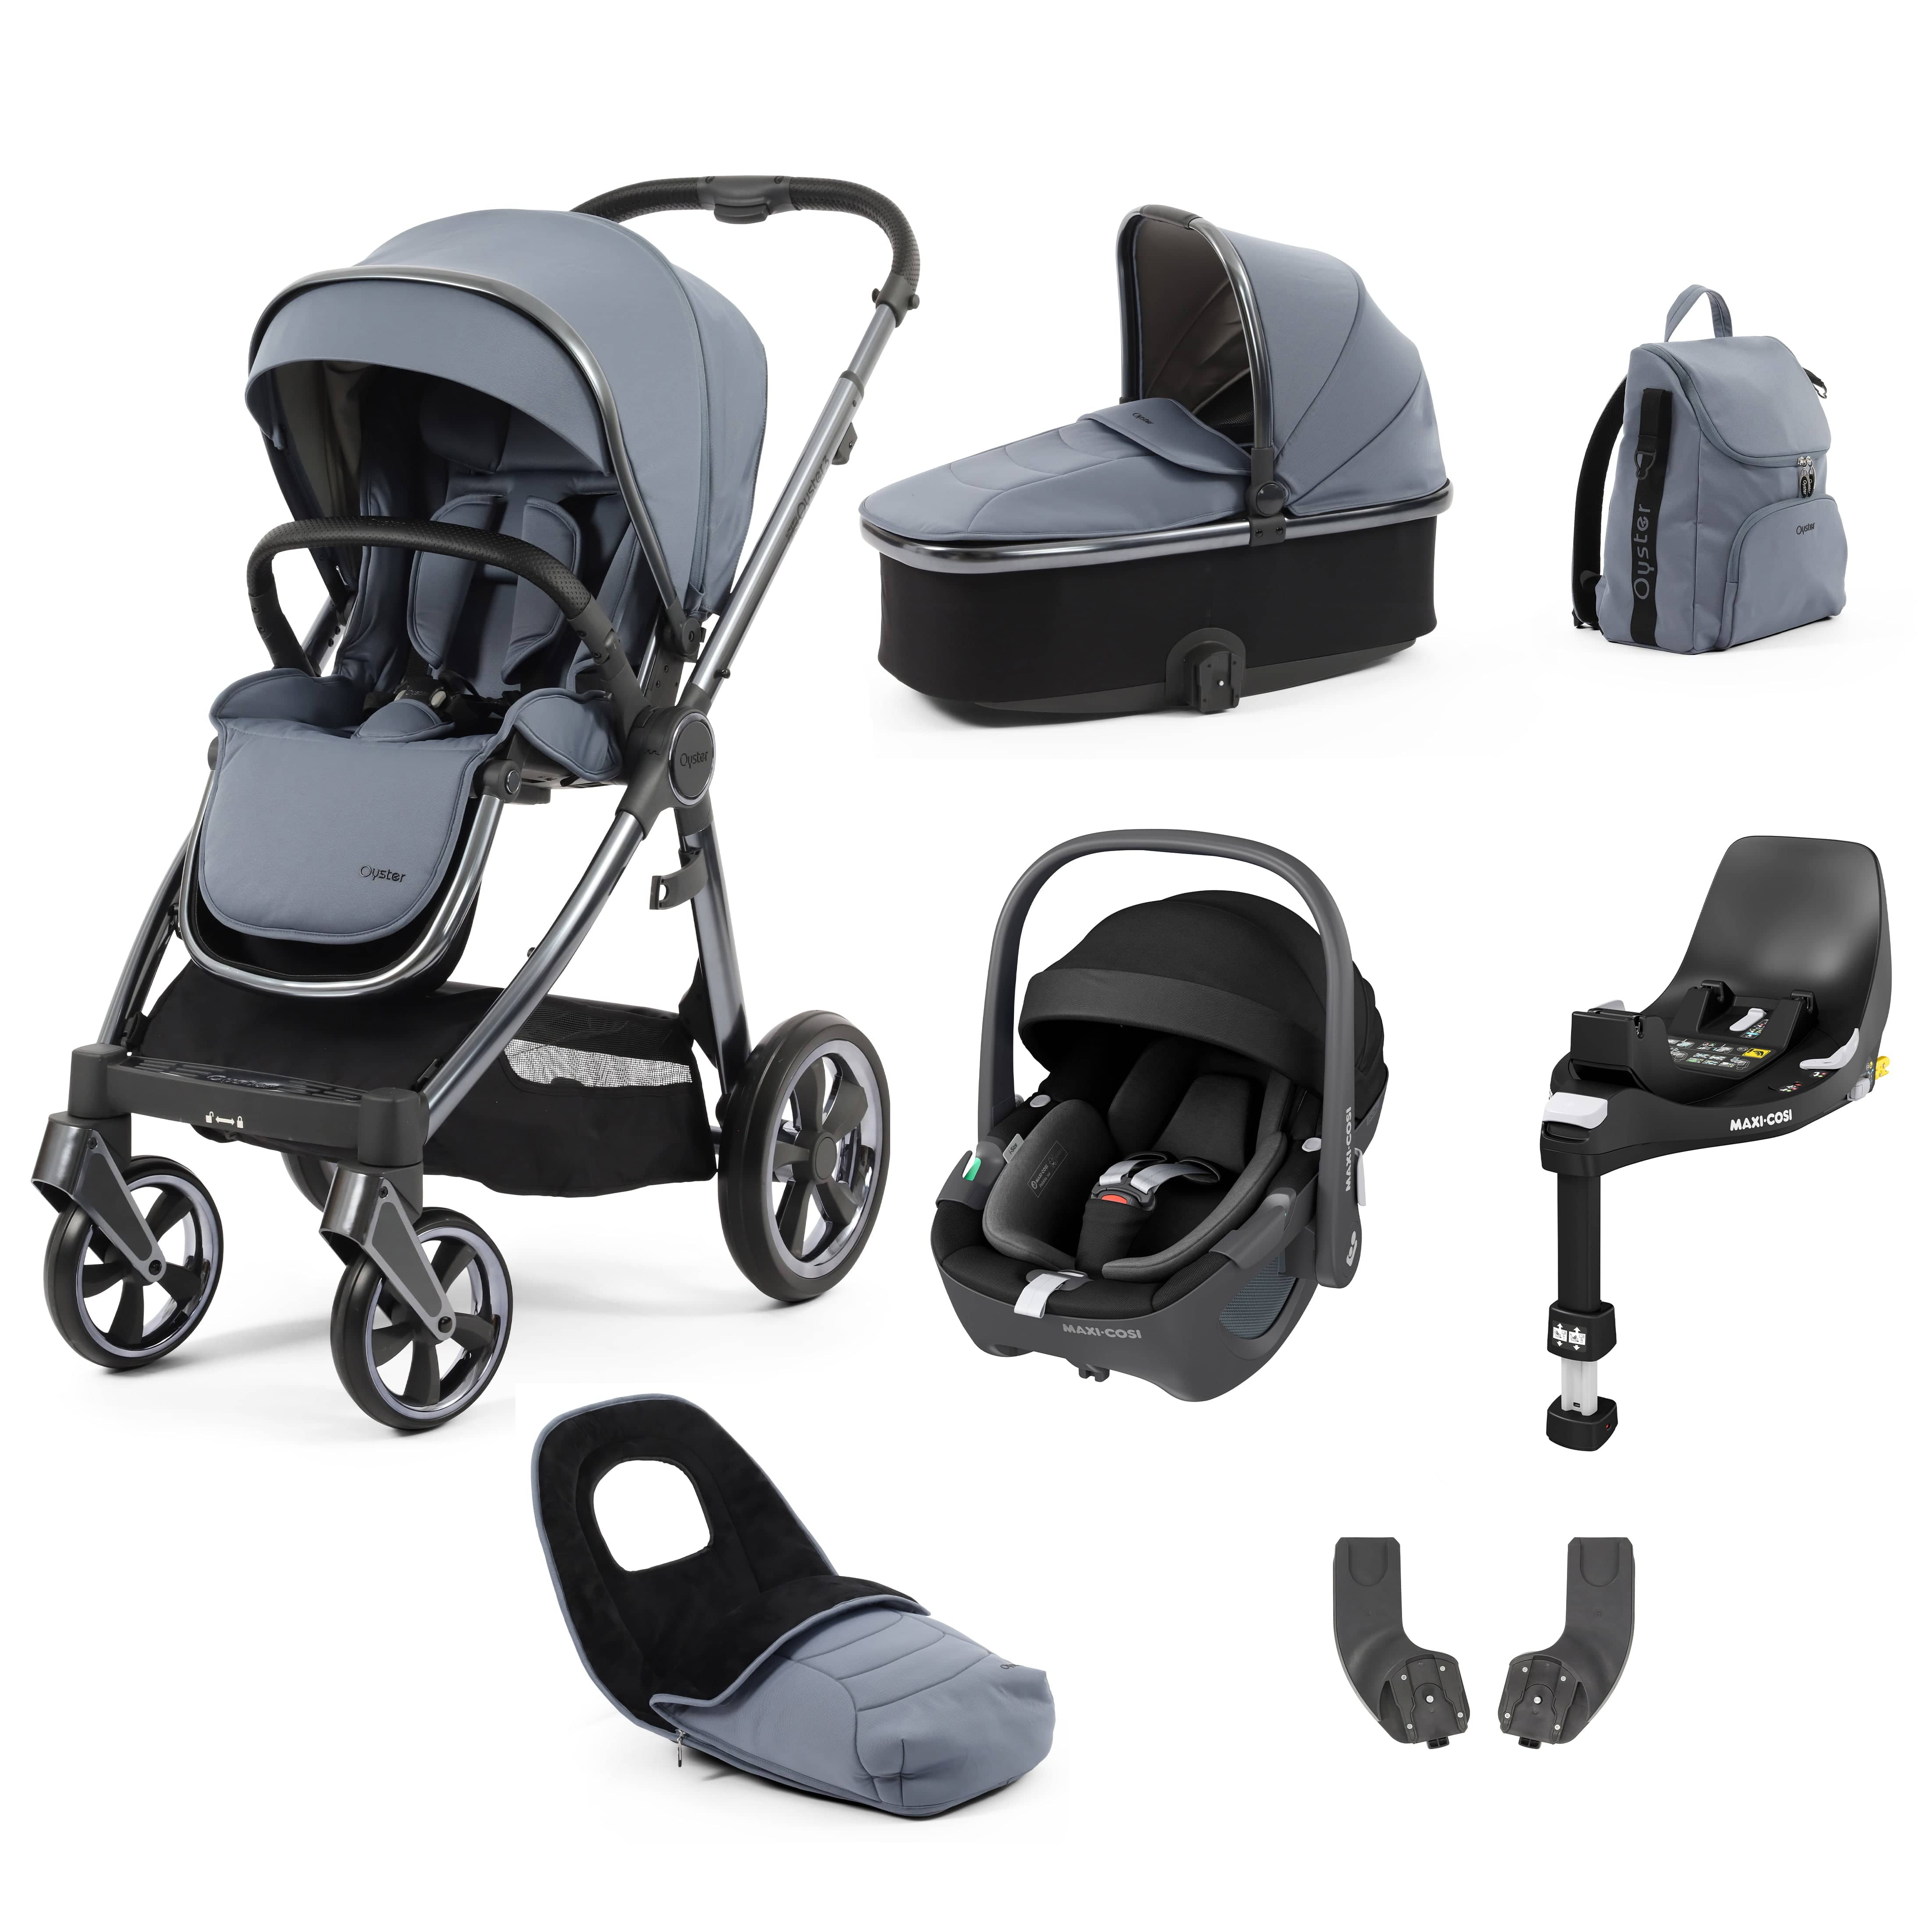 Babystyle Oyster 3 Luxury 7 Piece with Car Seat Bundle in Dream Blue Travel Systems 14806-DMB 5060711567228